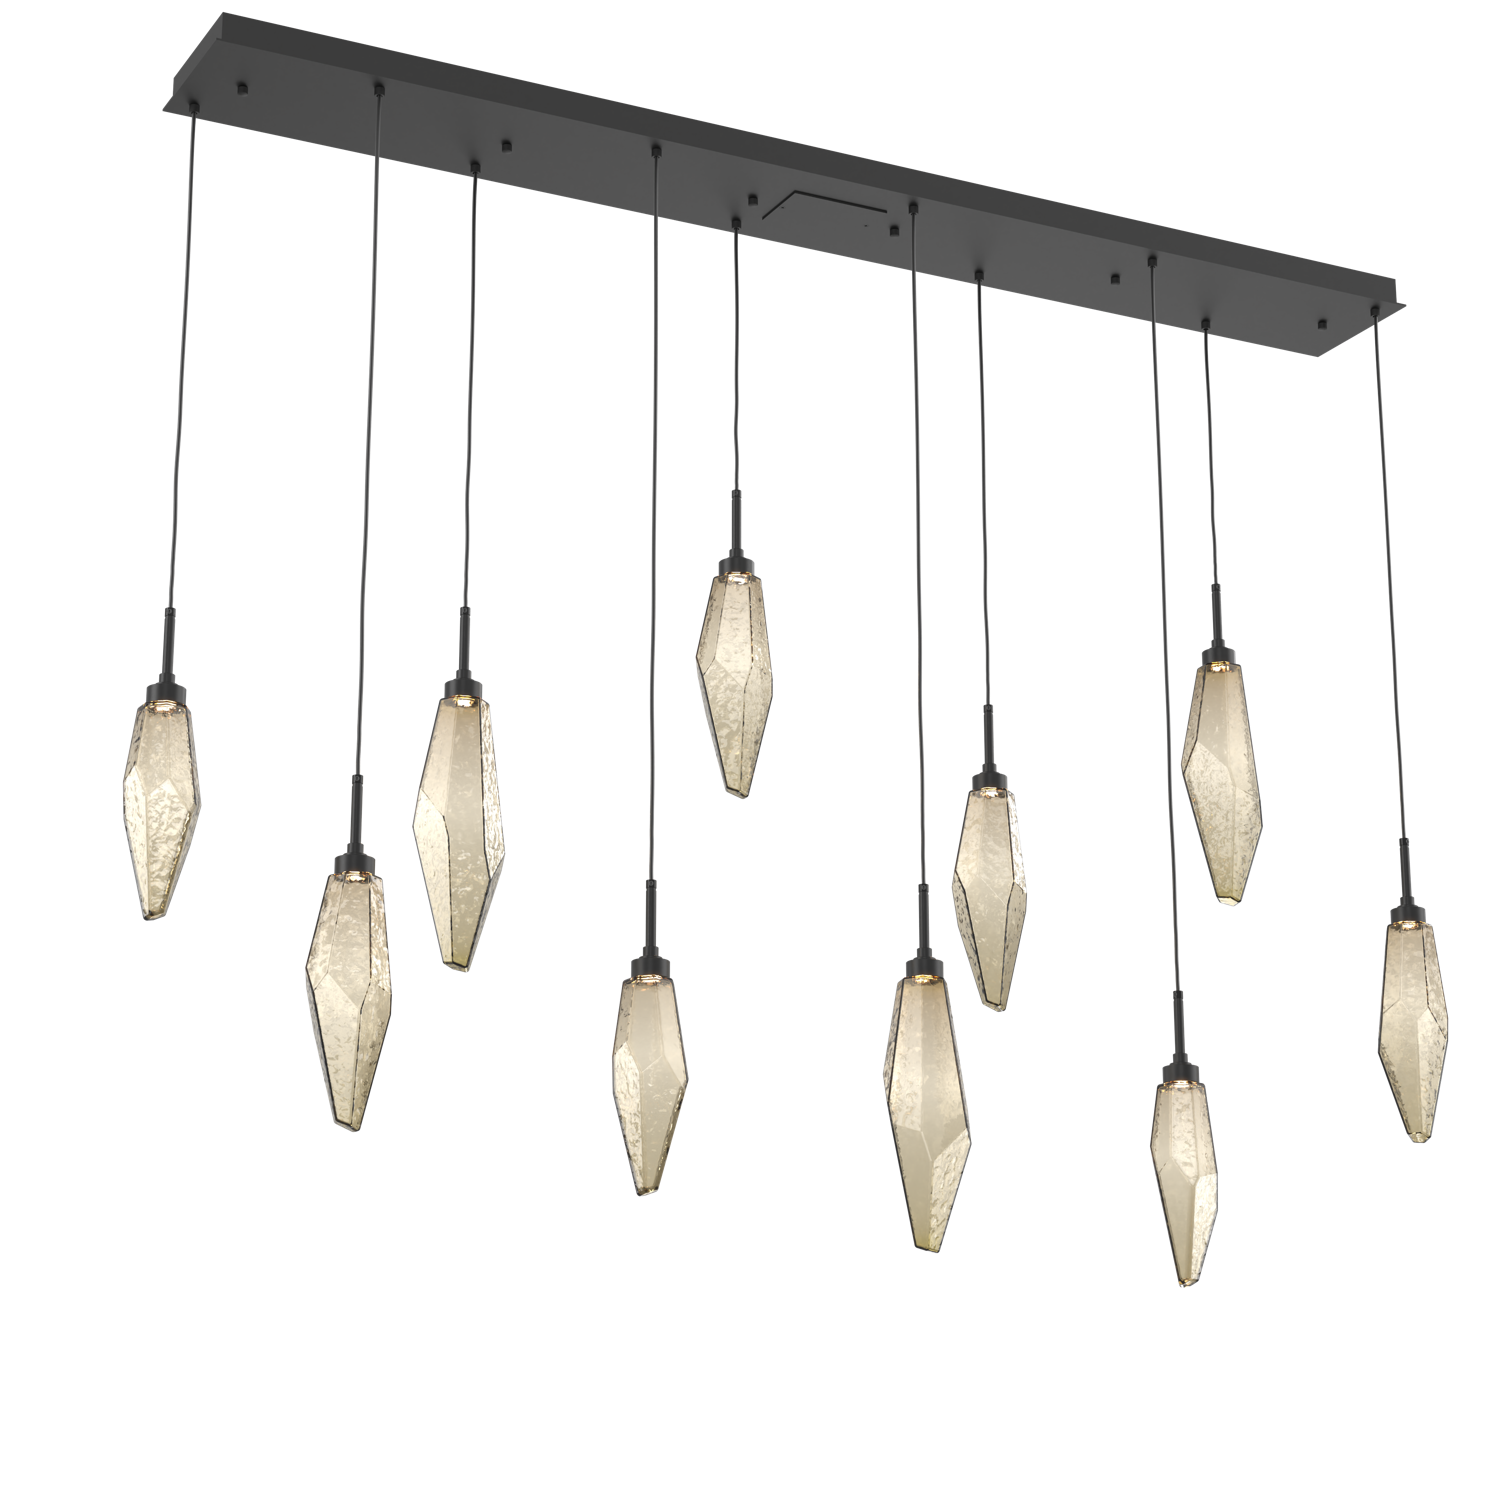 PLB0050-10-MB-CB-Hammerton-Studio-Rock-Crystal-10-light-linear-pendant-chandelier-with-matte-black-finish-and-chilled-bronze-blown-glass-shades-and-LED-lamping